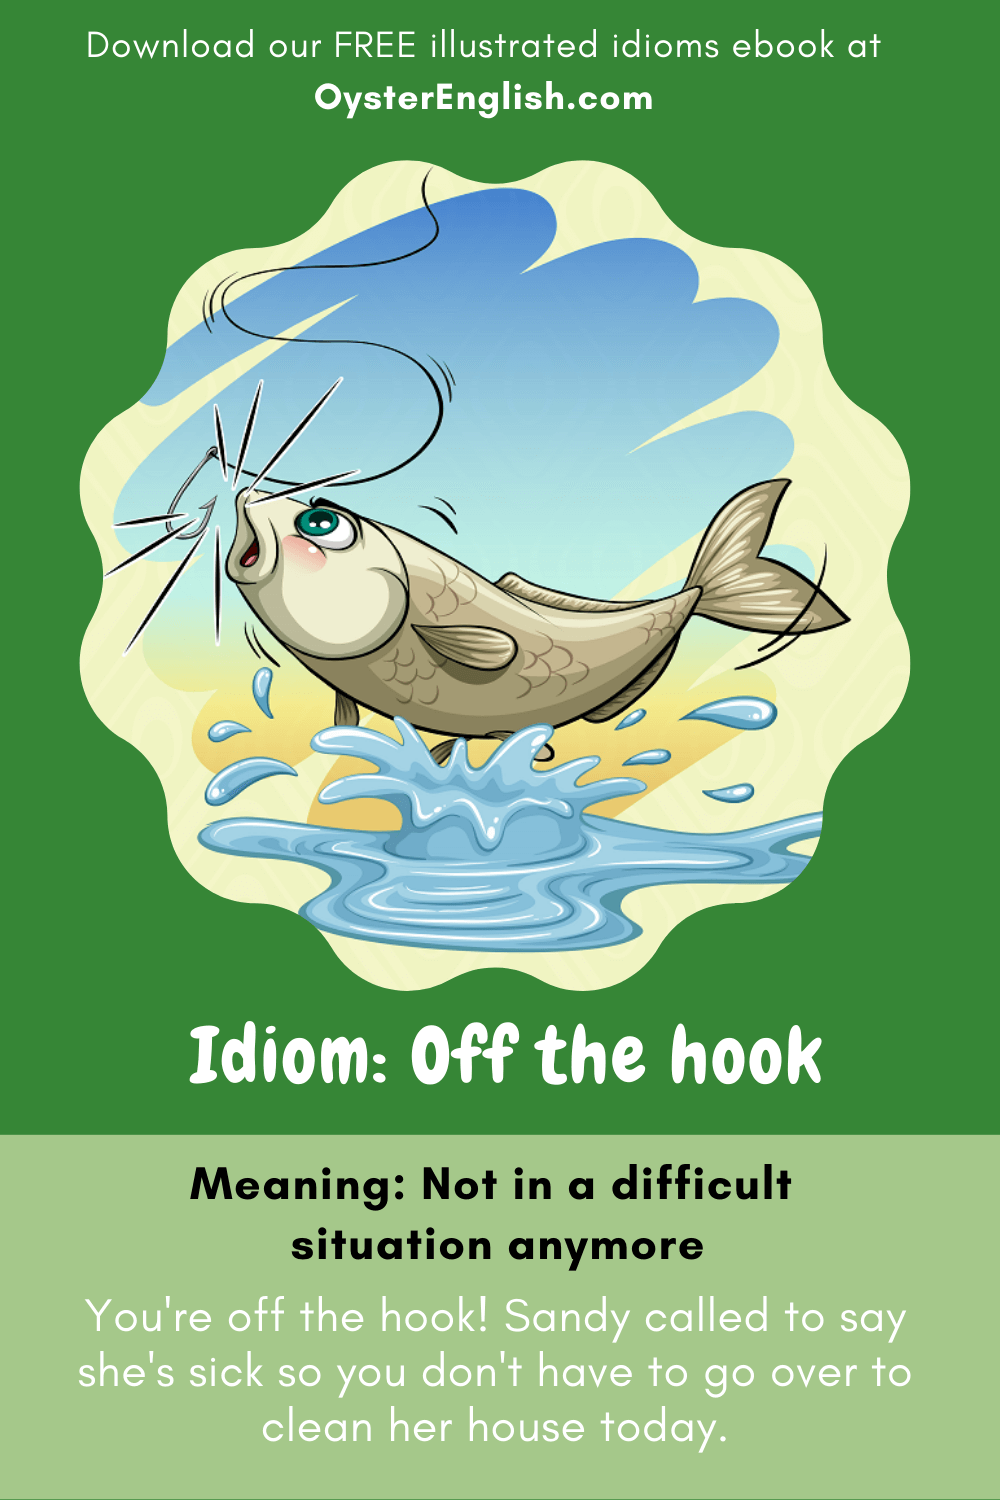 A fish escapes without biting on a fishing hook to depict the idiom "off the  hook." Caption: You're off the hook! Sandy called to say she's sick so you don't have to go over to clean her house today.